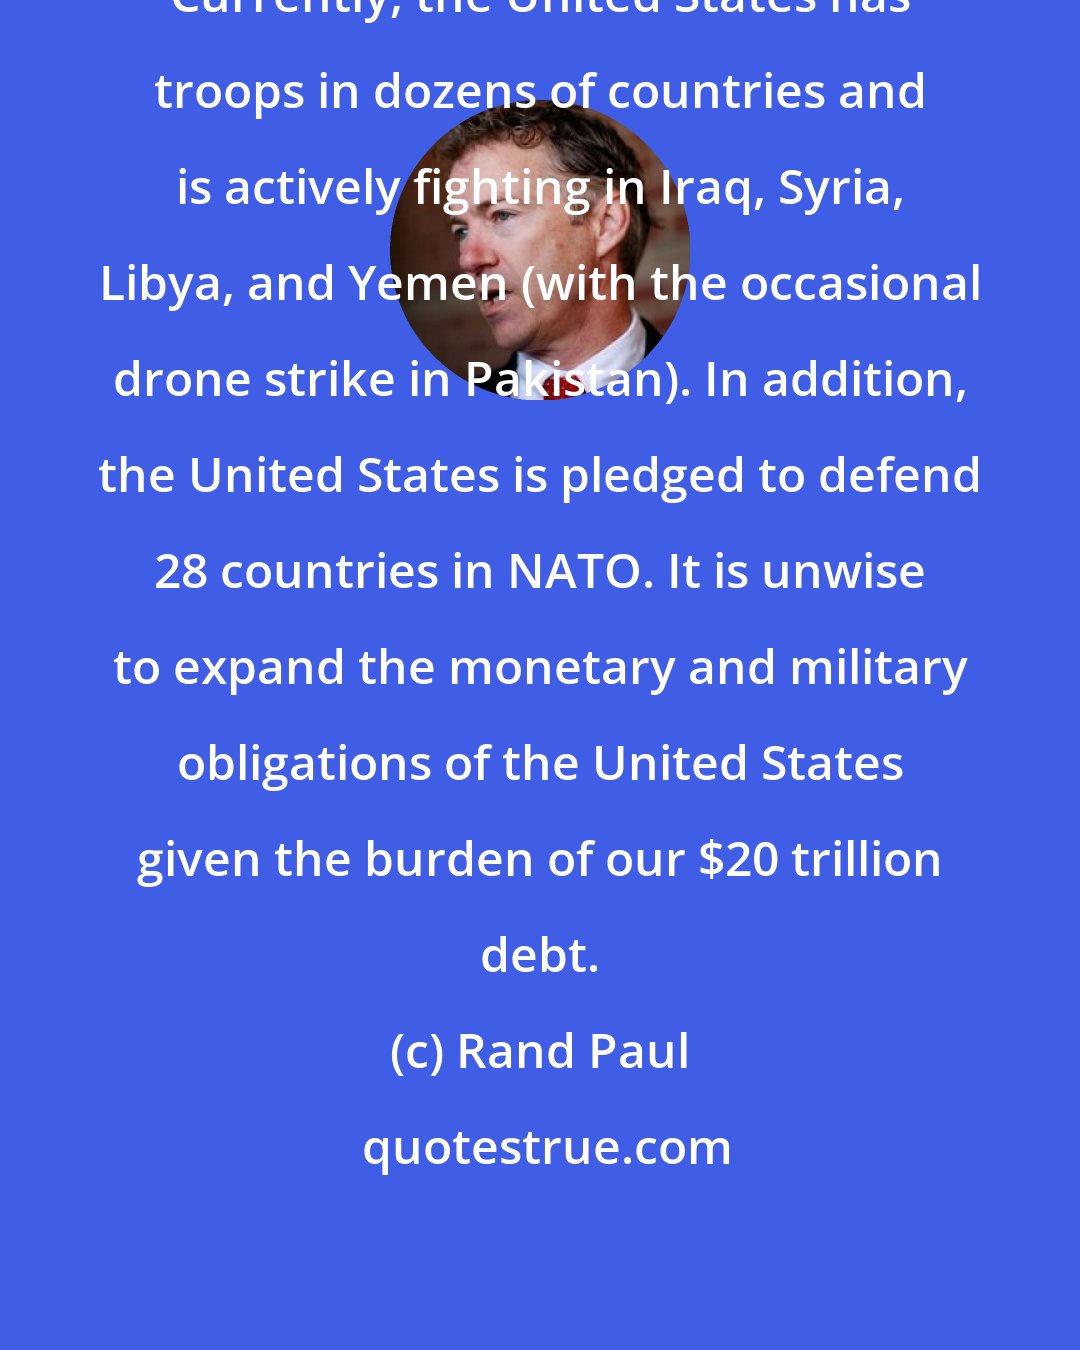 Rand Paul: Currently, the United States has troops in dozens of countries and is actively fighting in Iraq, Syria, Libya, and Yemen (with the occasional drone strike in Pakistan). In addition, the United States is pledged to defend 28 countries in NATO. It is unwise to expand the monetary and military obligations of the United States given the burden of our $20 trillion debt.